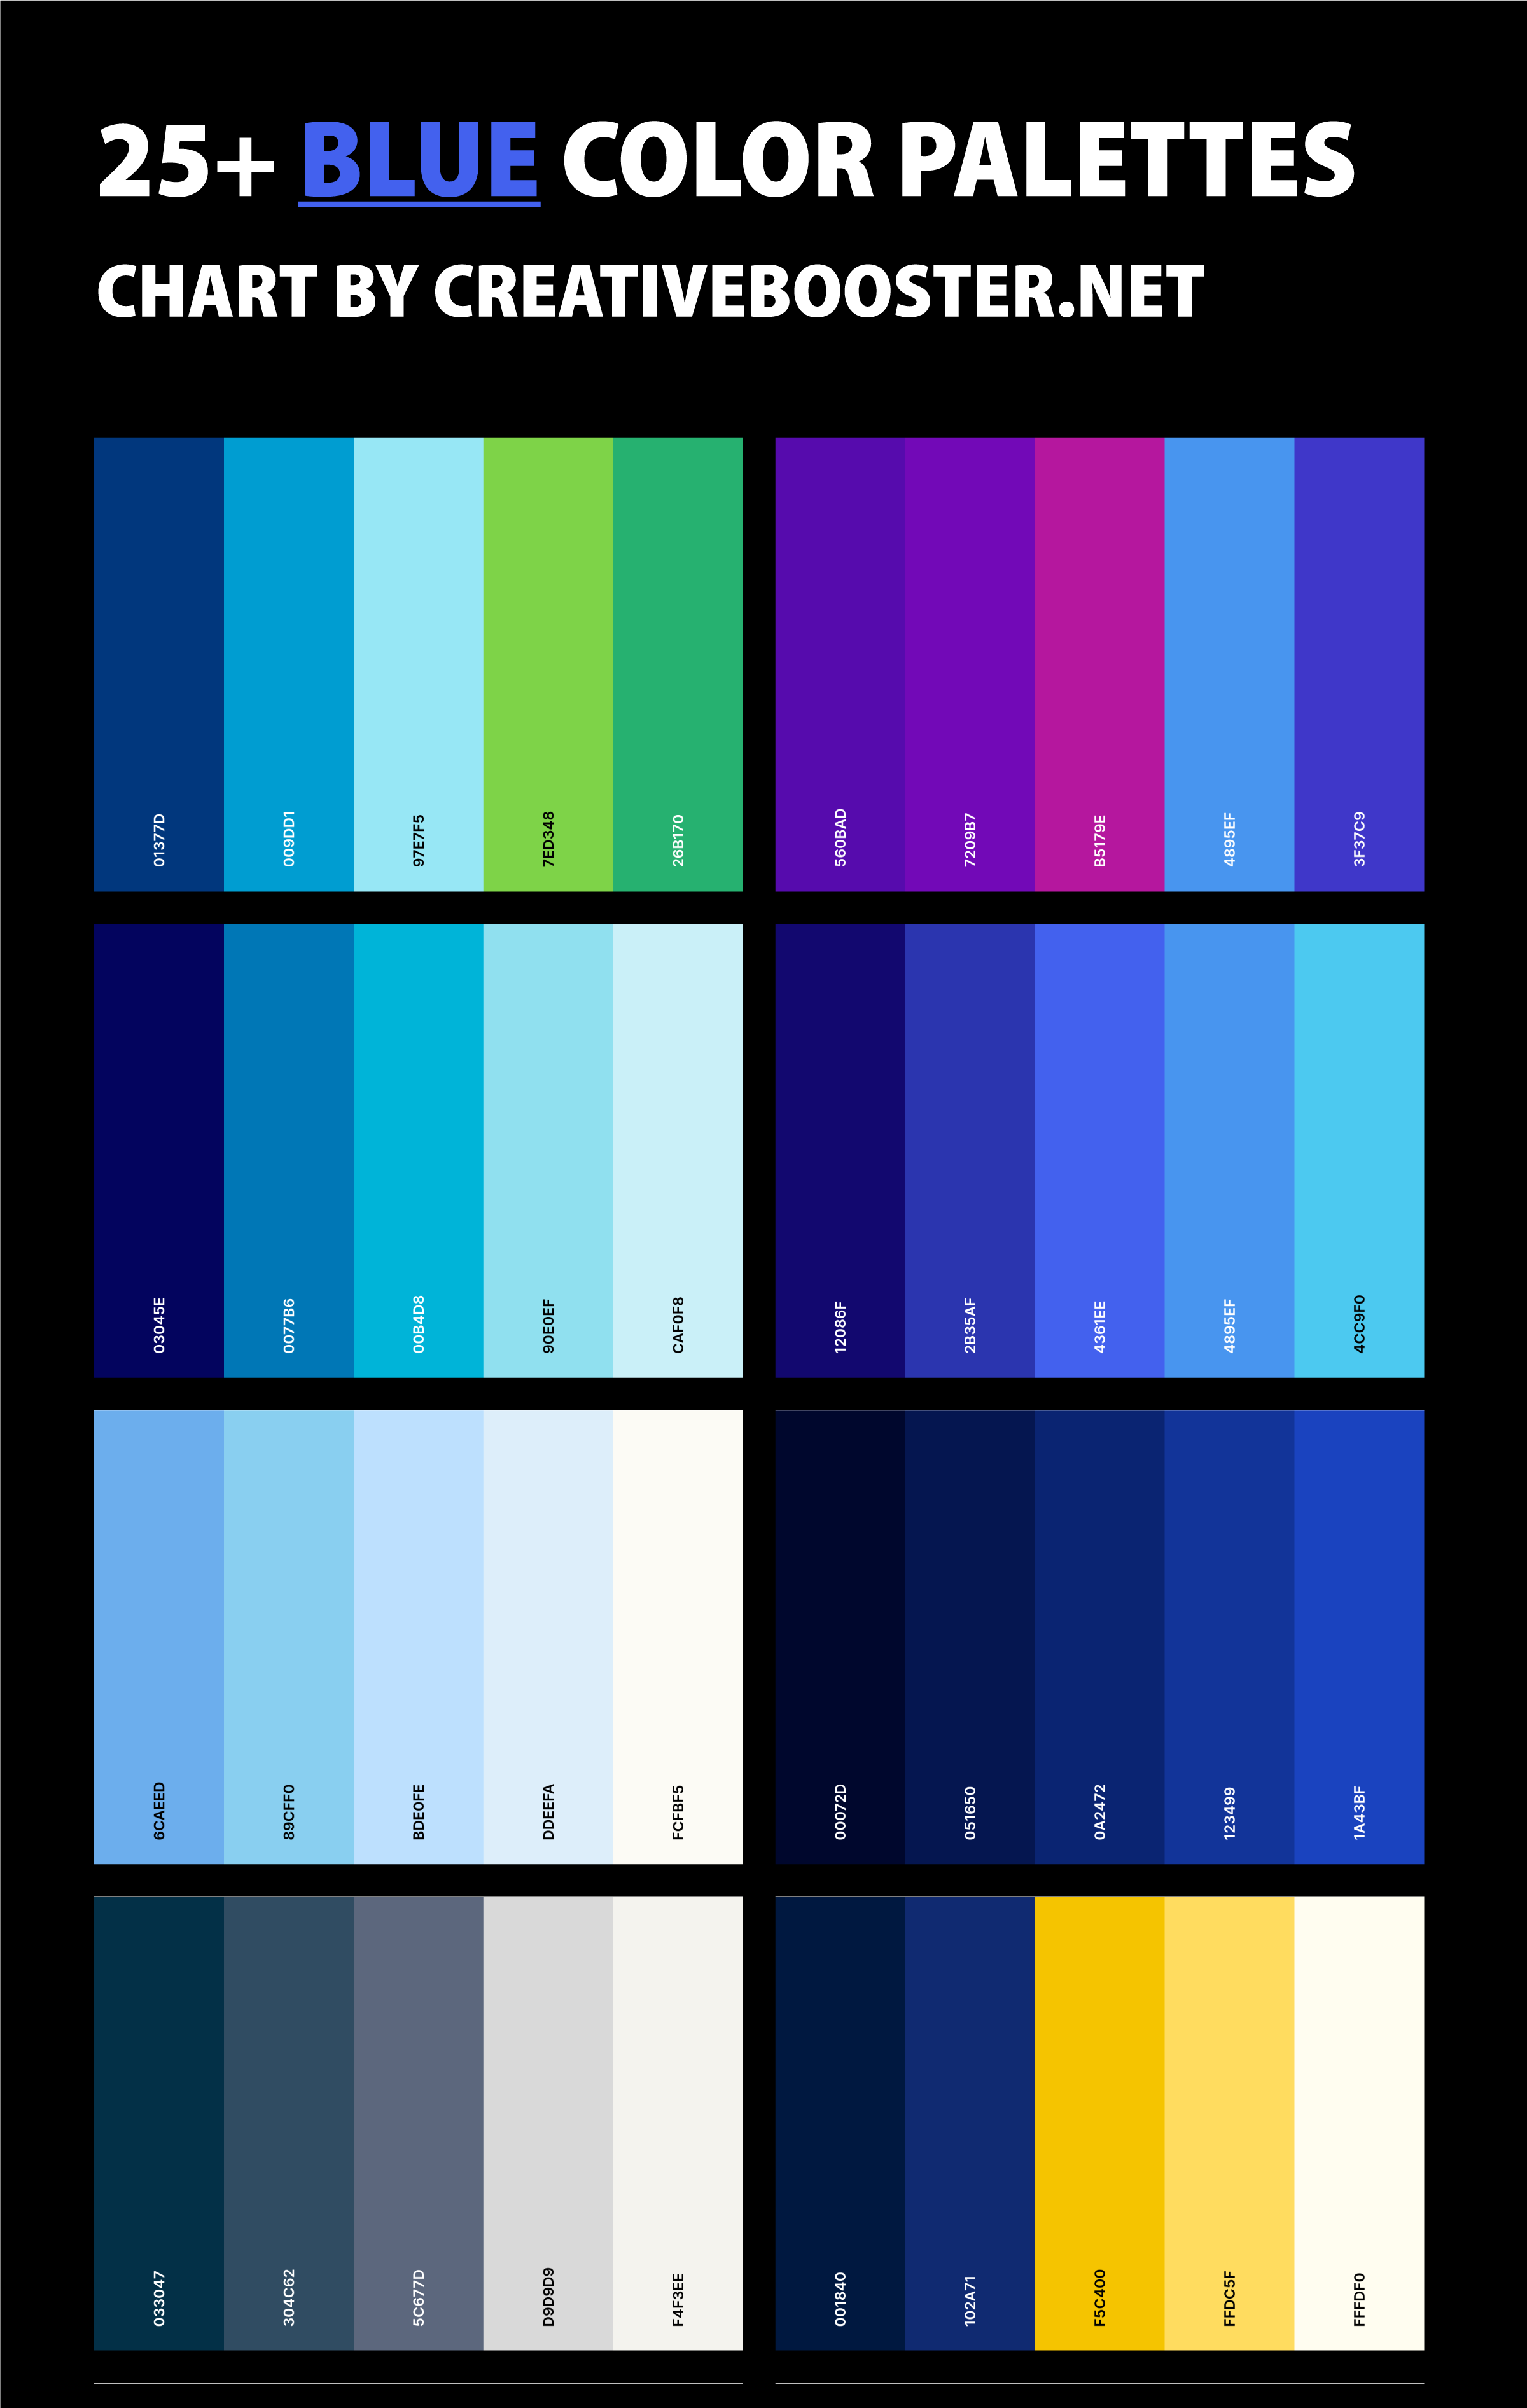 https://cdn.shopify.com/s/files/1/1038/1798/files/blue-color-palettes-with-hex-codes-pinterest-tall.png?v=1688972066